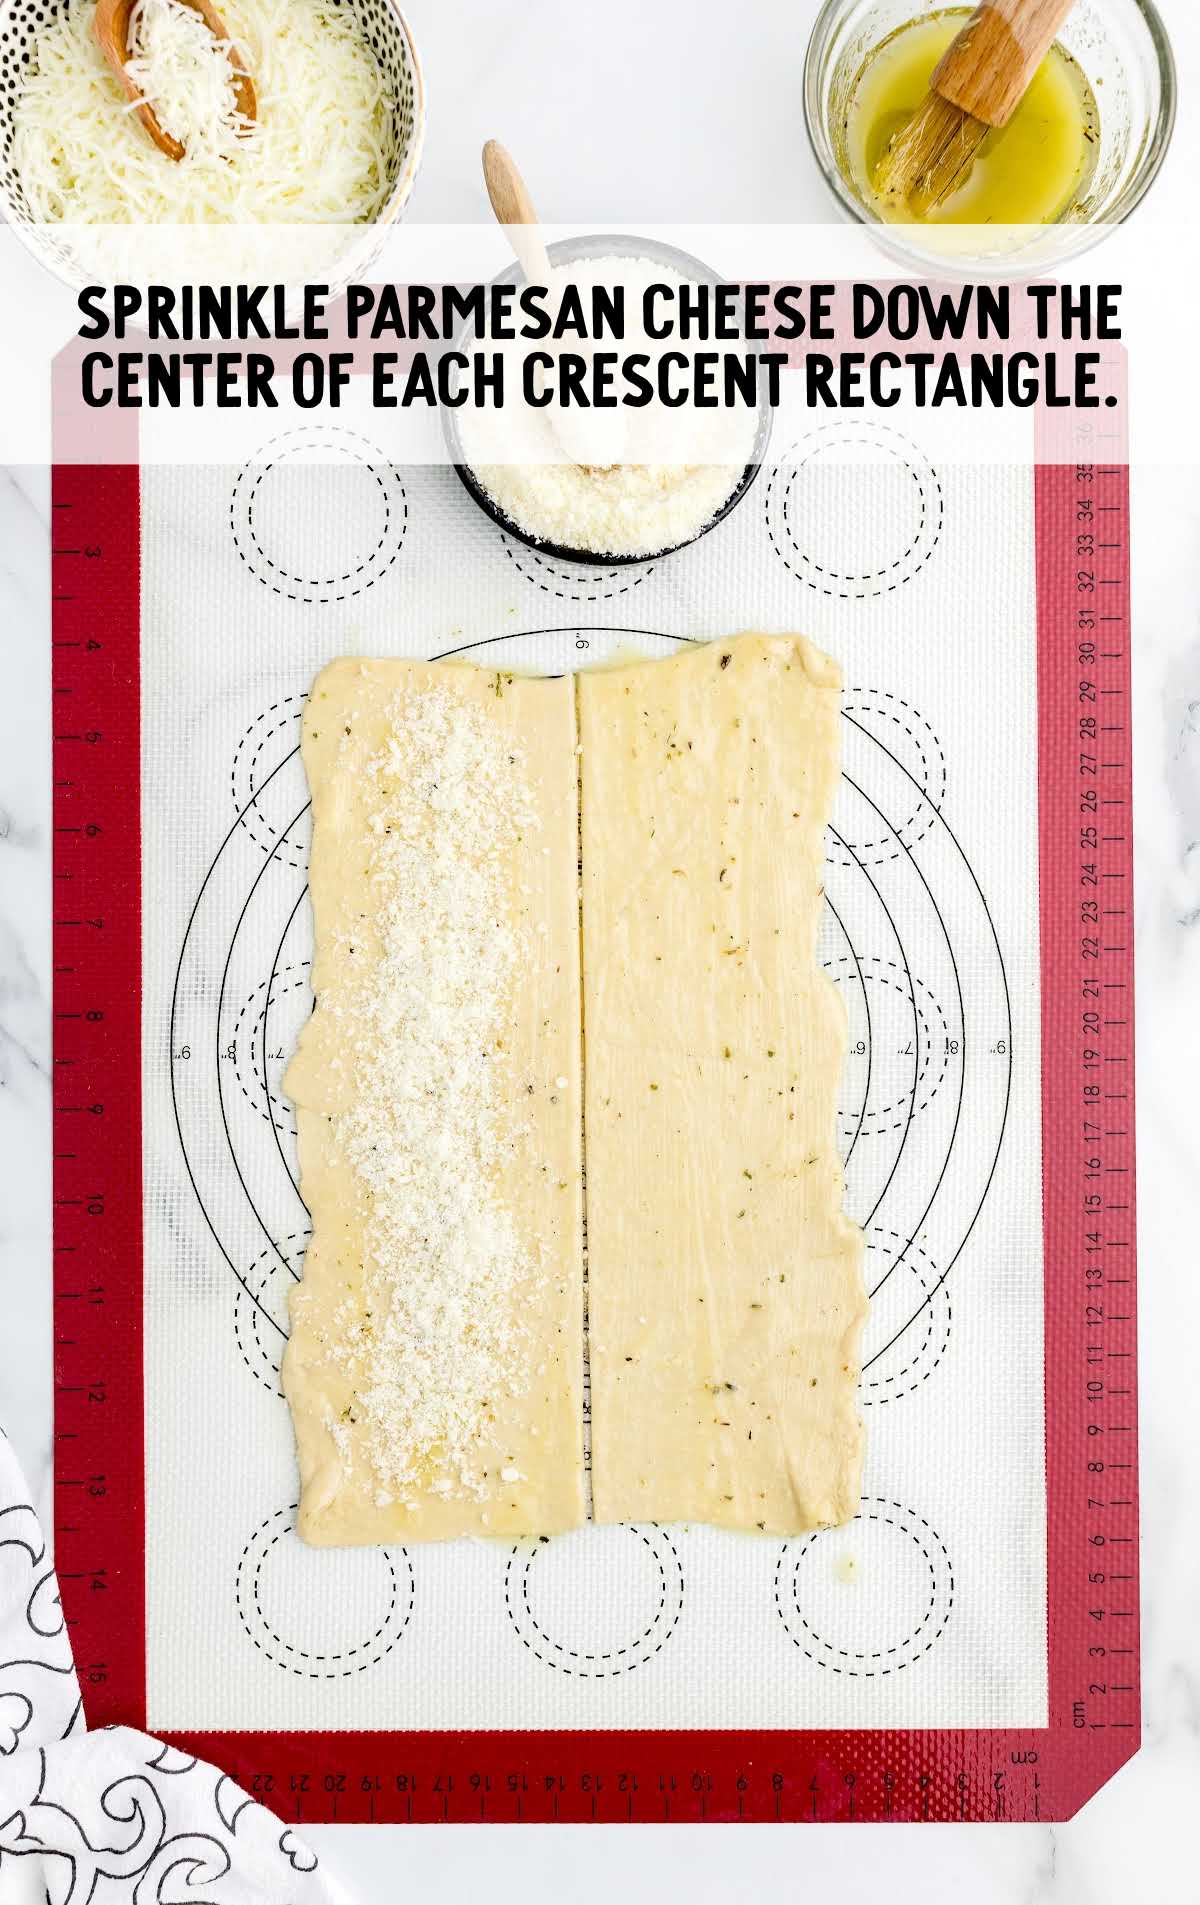 parmesan cheese sprinkled down the center